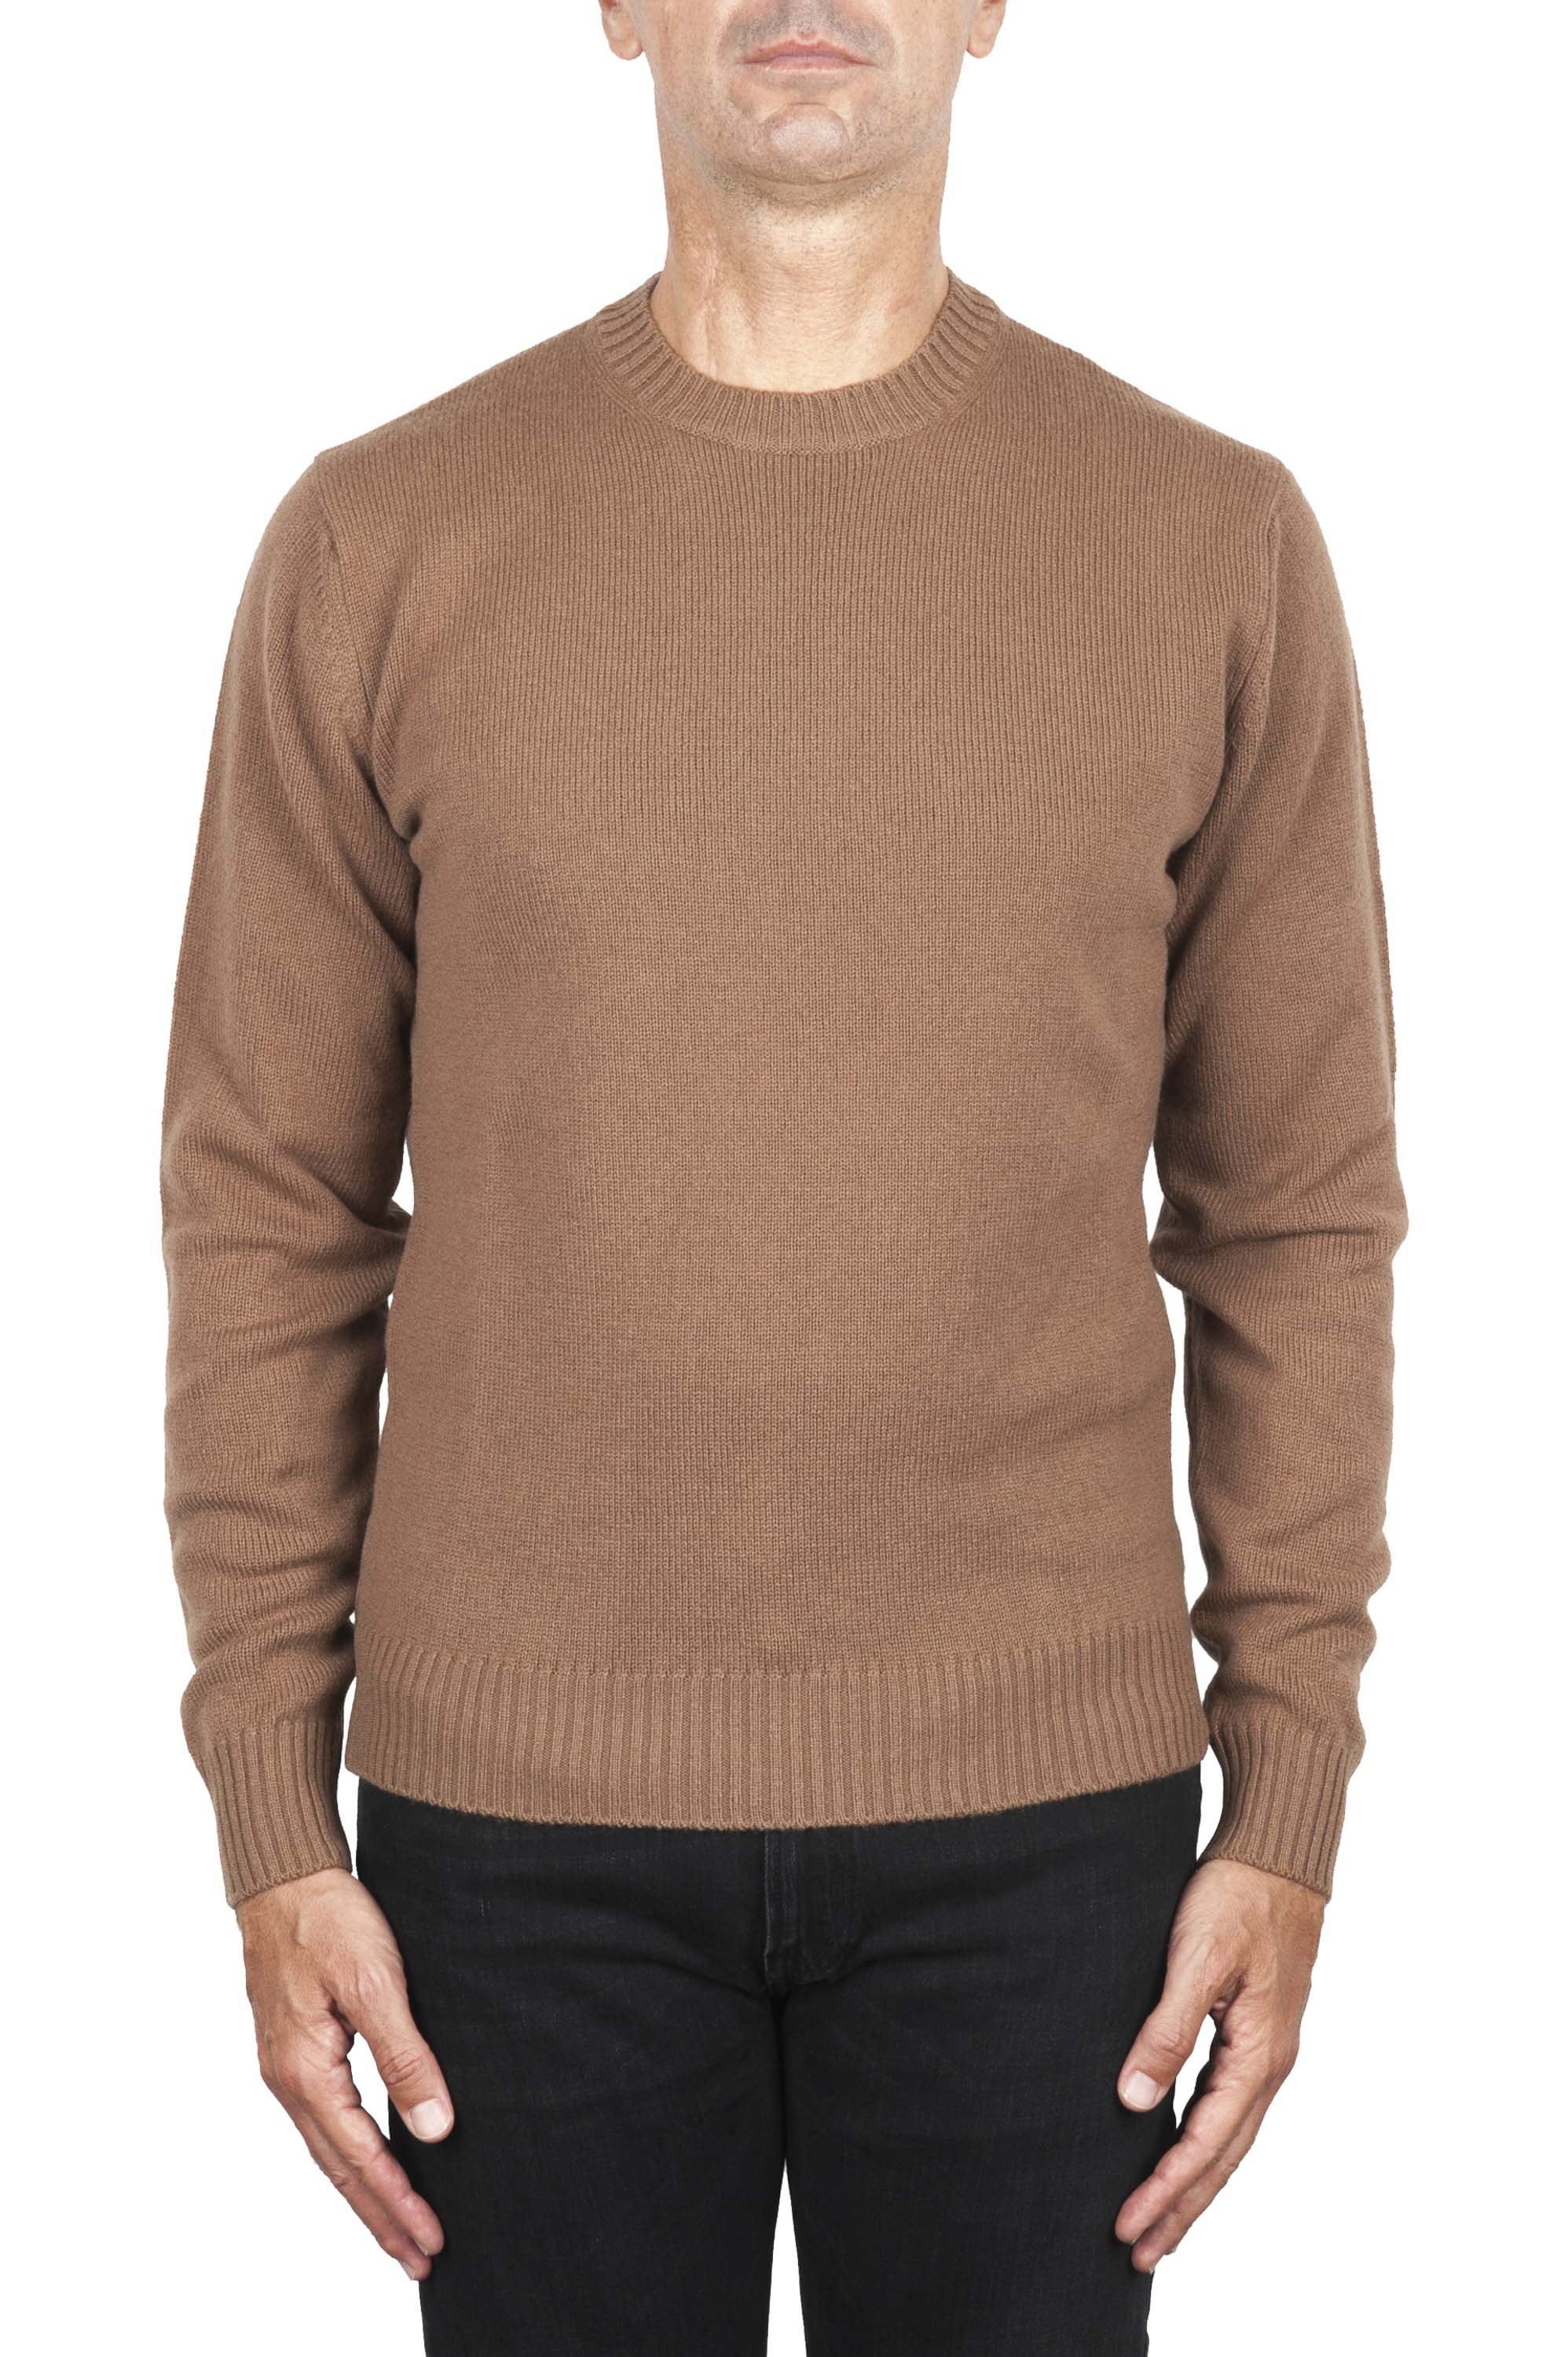 SBU 02997_2020AW Brown wool and cashmere blend crew neck sweater 01